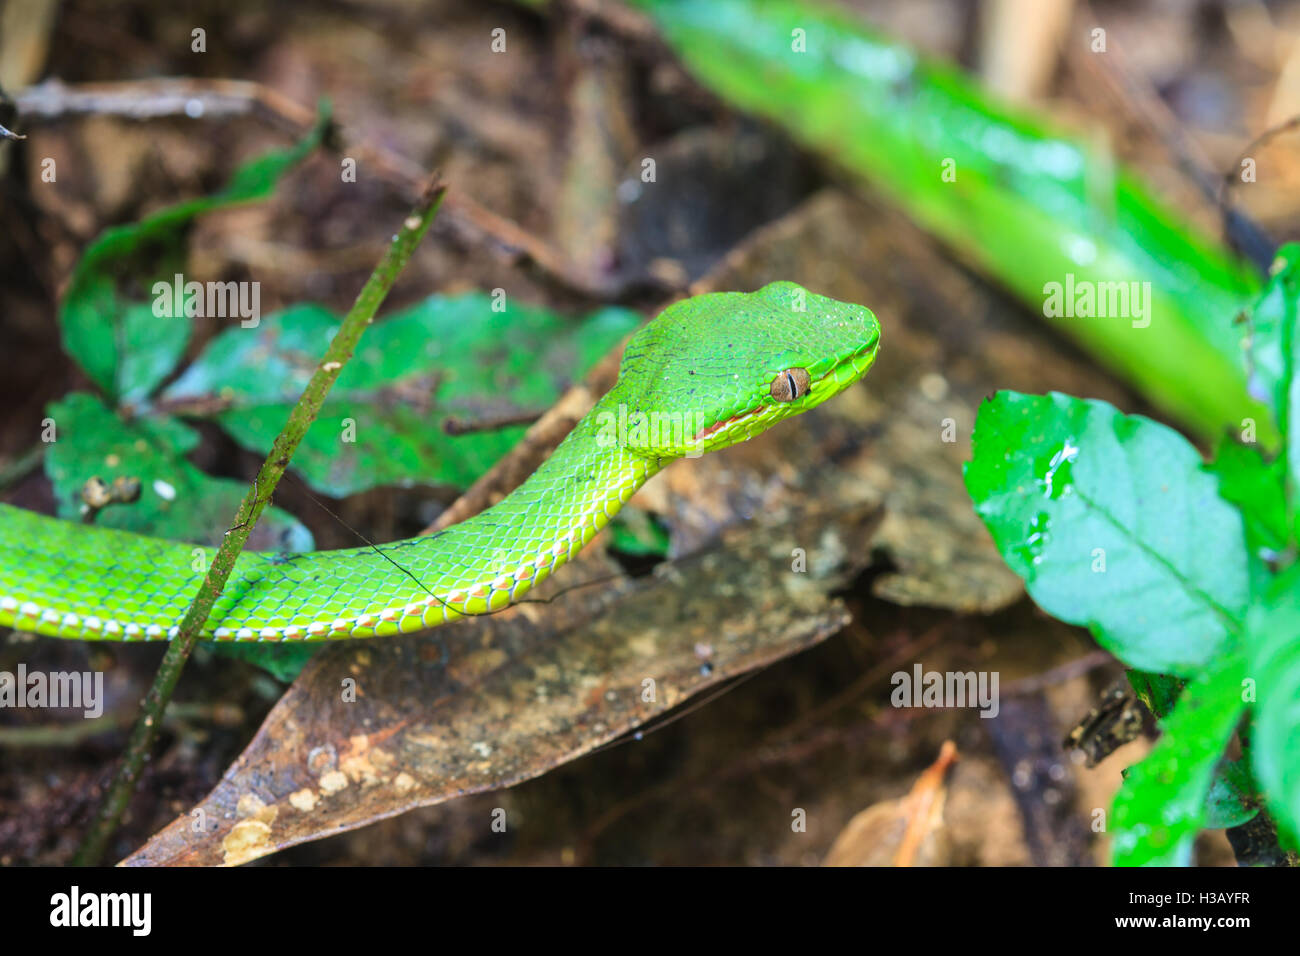 Green pit viper snake, Asian pit viper snake in nature Stock Photo